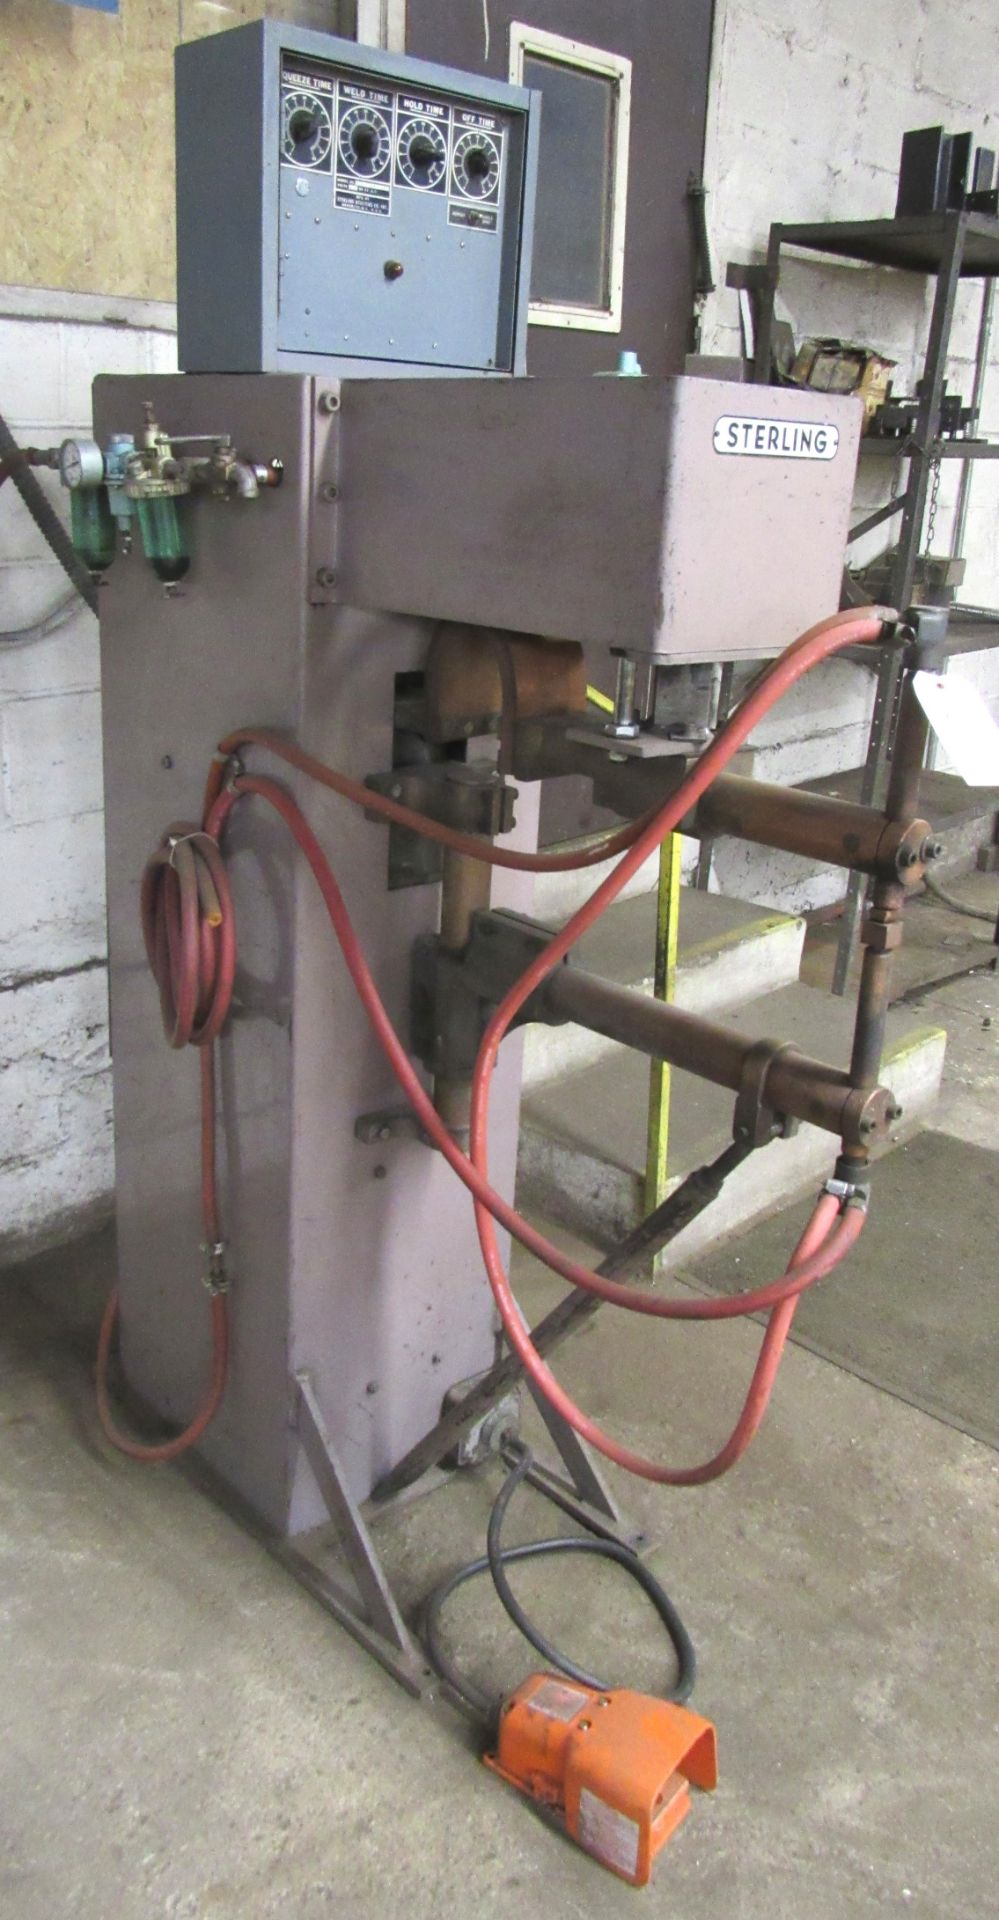 Sterling Mod.2SP18AS18 40 KVA Rocker Arm Spot Welder - S/N 3142, 18" Throat, Sequence Timers, - Image 2 of 2